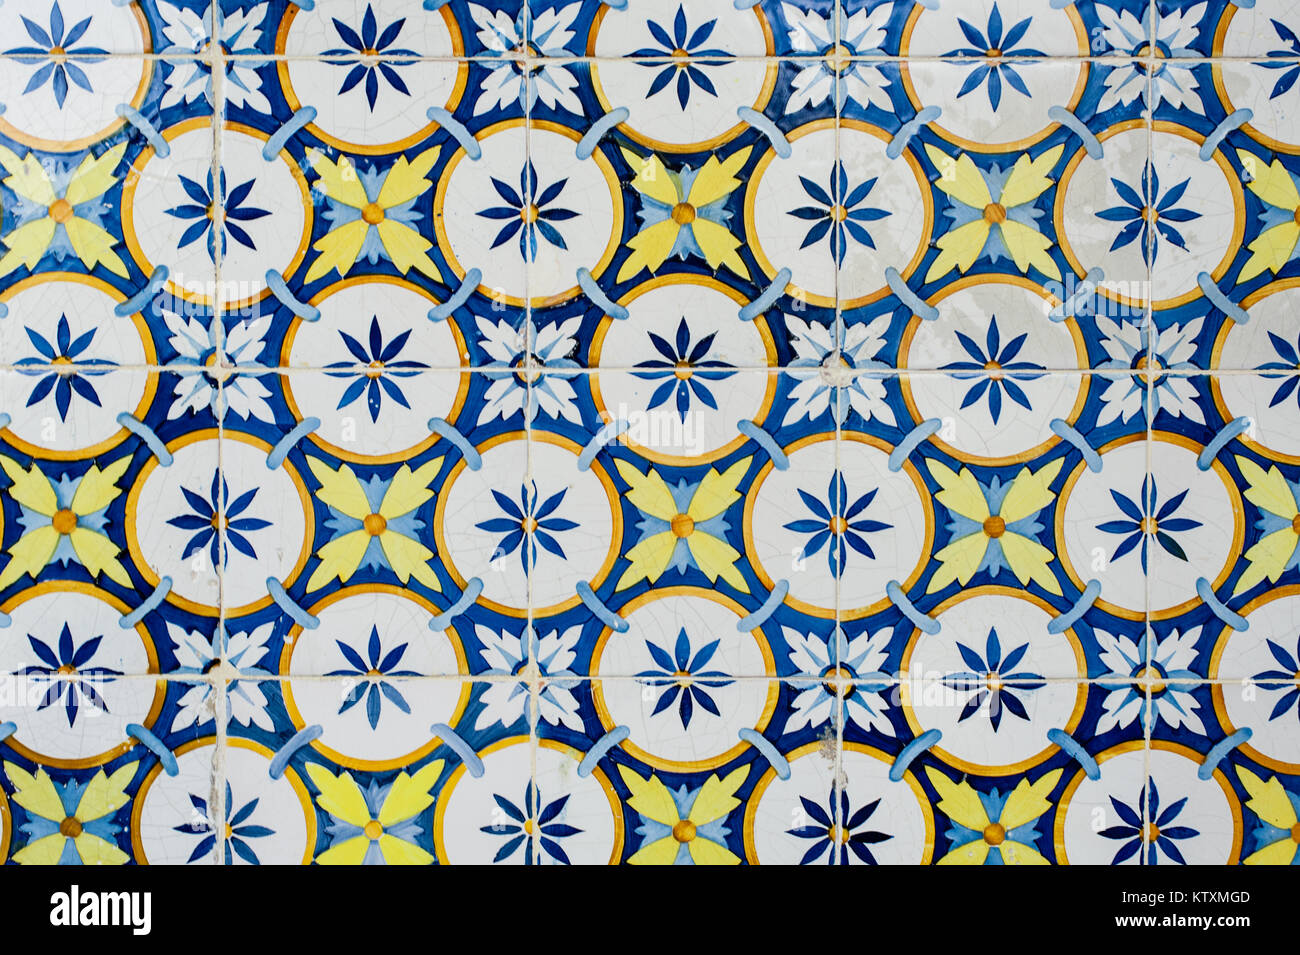 Portuguese azulejo ceramic tiles with a circular, floral pattern, decorate the external walls of a building in Lisbon, Portugal. Stock Photo